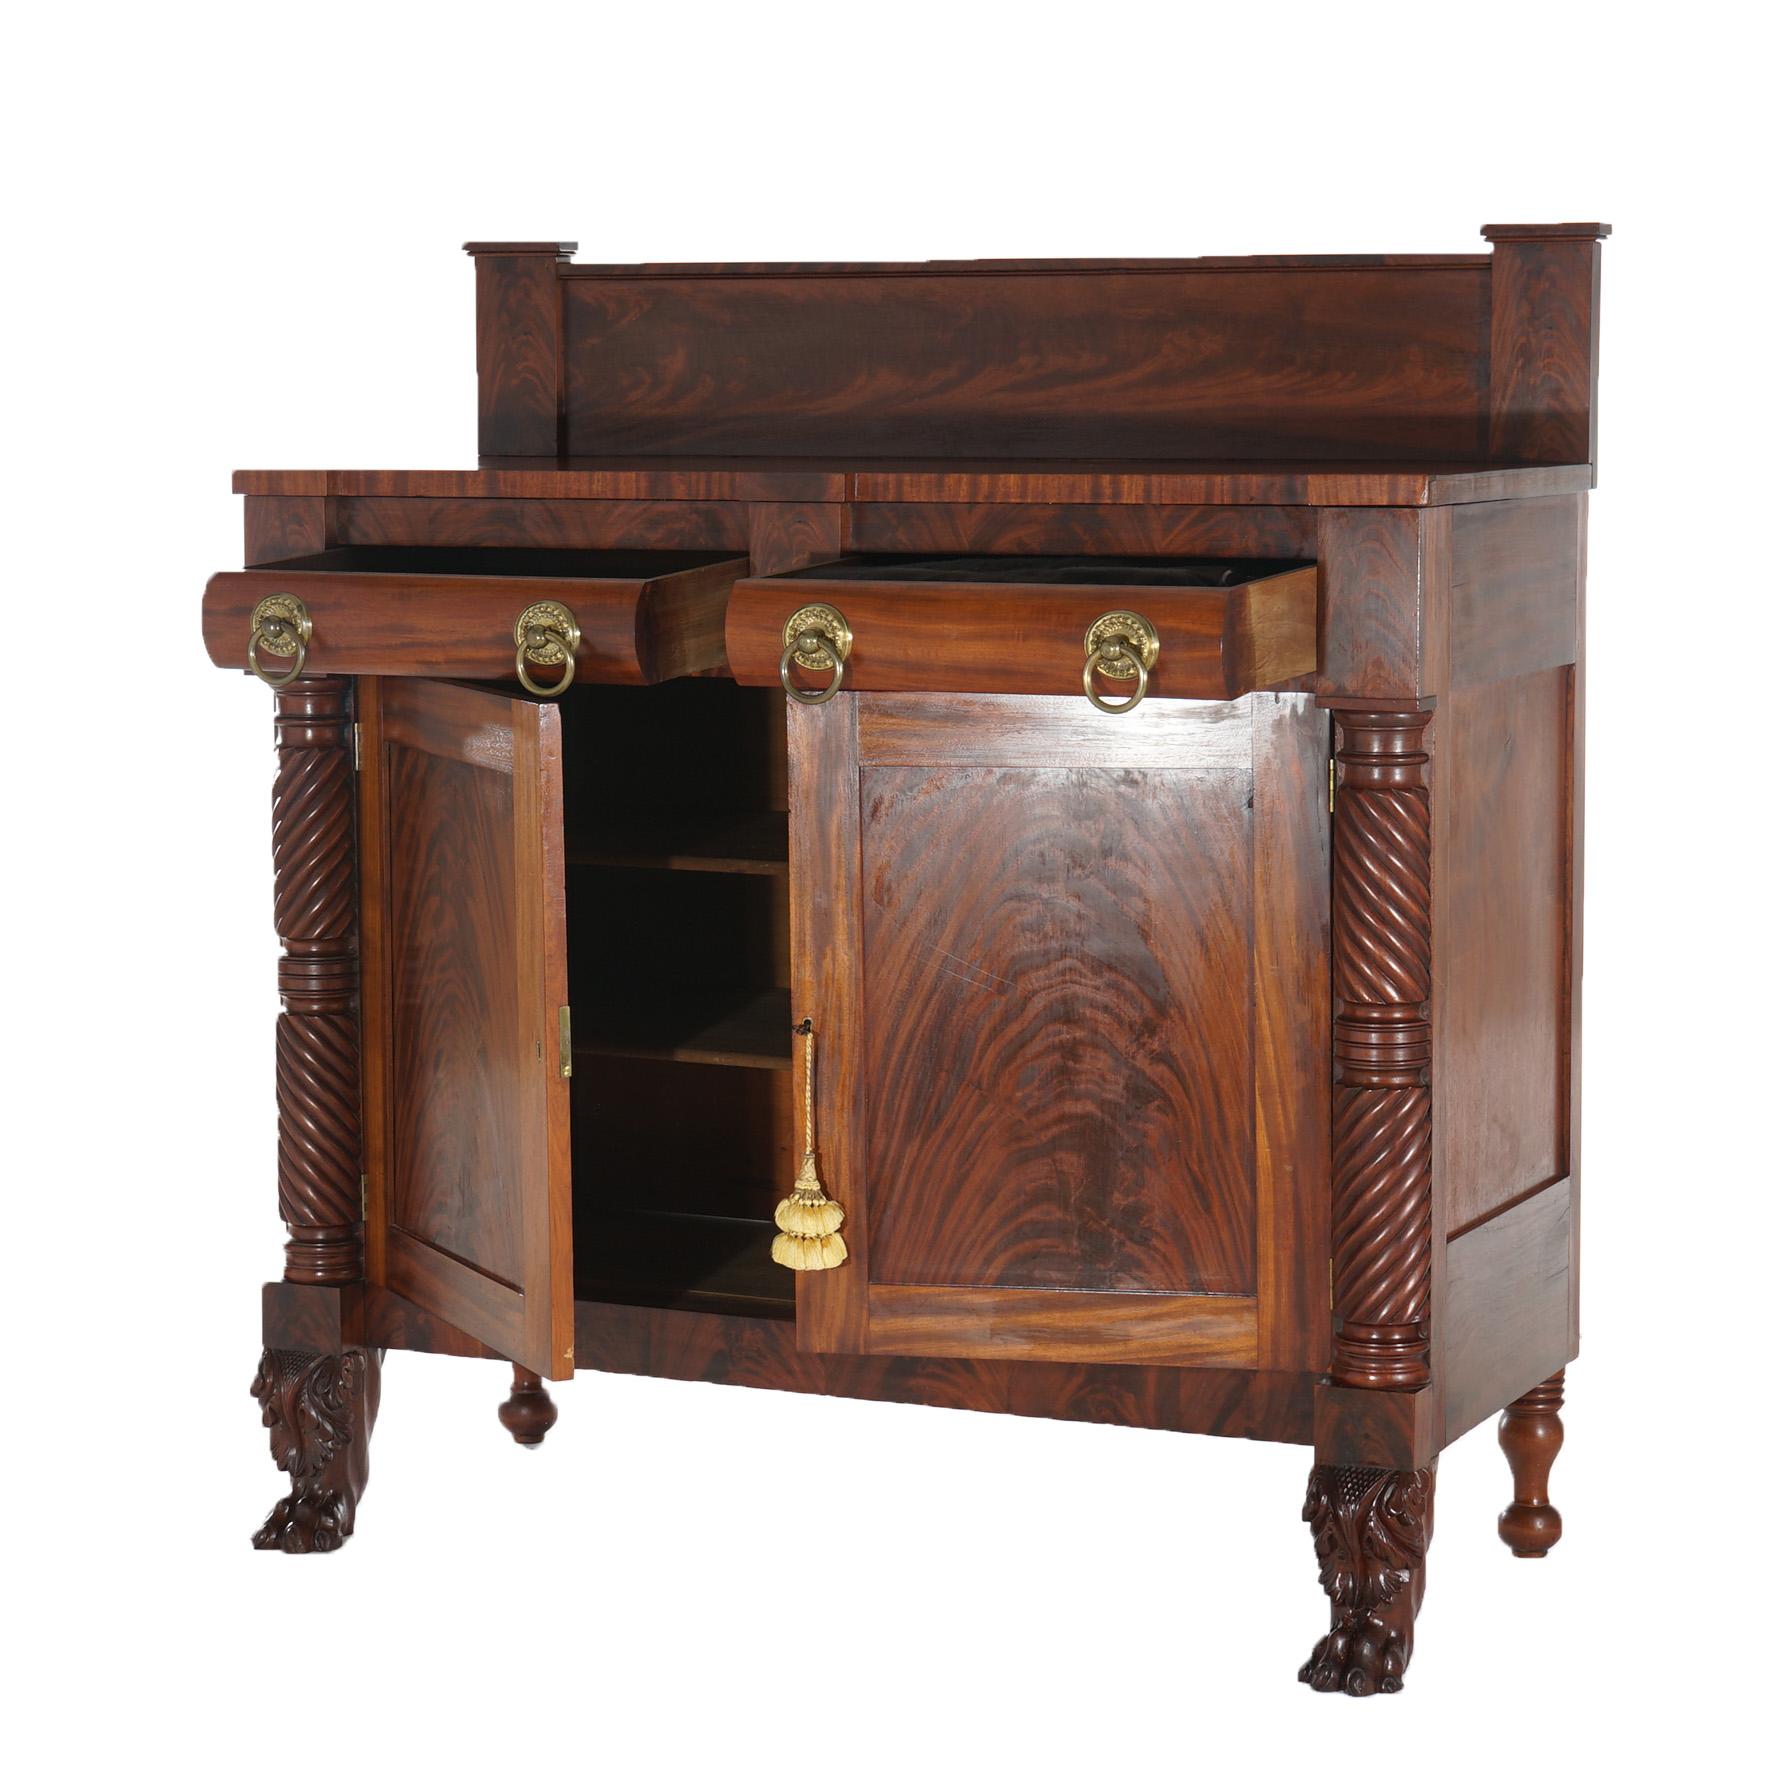 ***Ask About Reduced In-House Shipping Rates - Reliable Service & Fully Insured***
An antique American Empire linen press sideboard offers flame mahogany construction with marble top over case with double drawers and double door cabinet flanked by